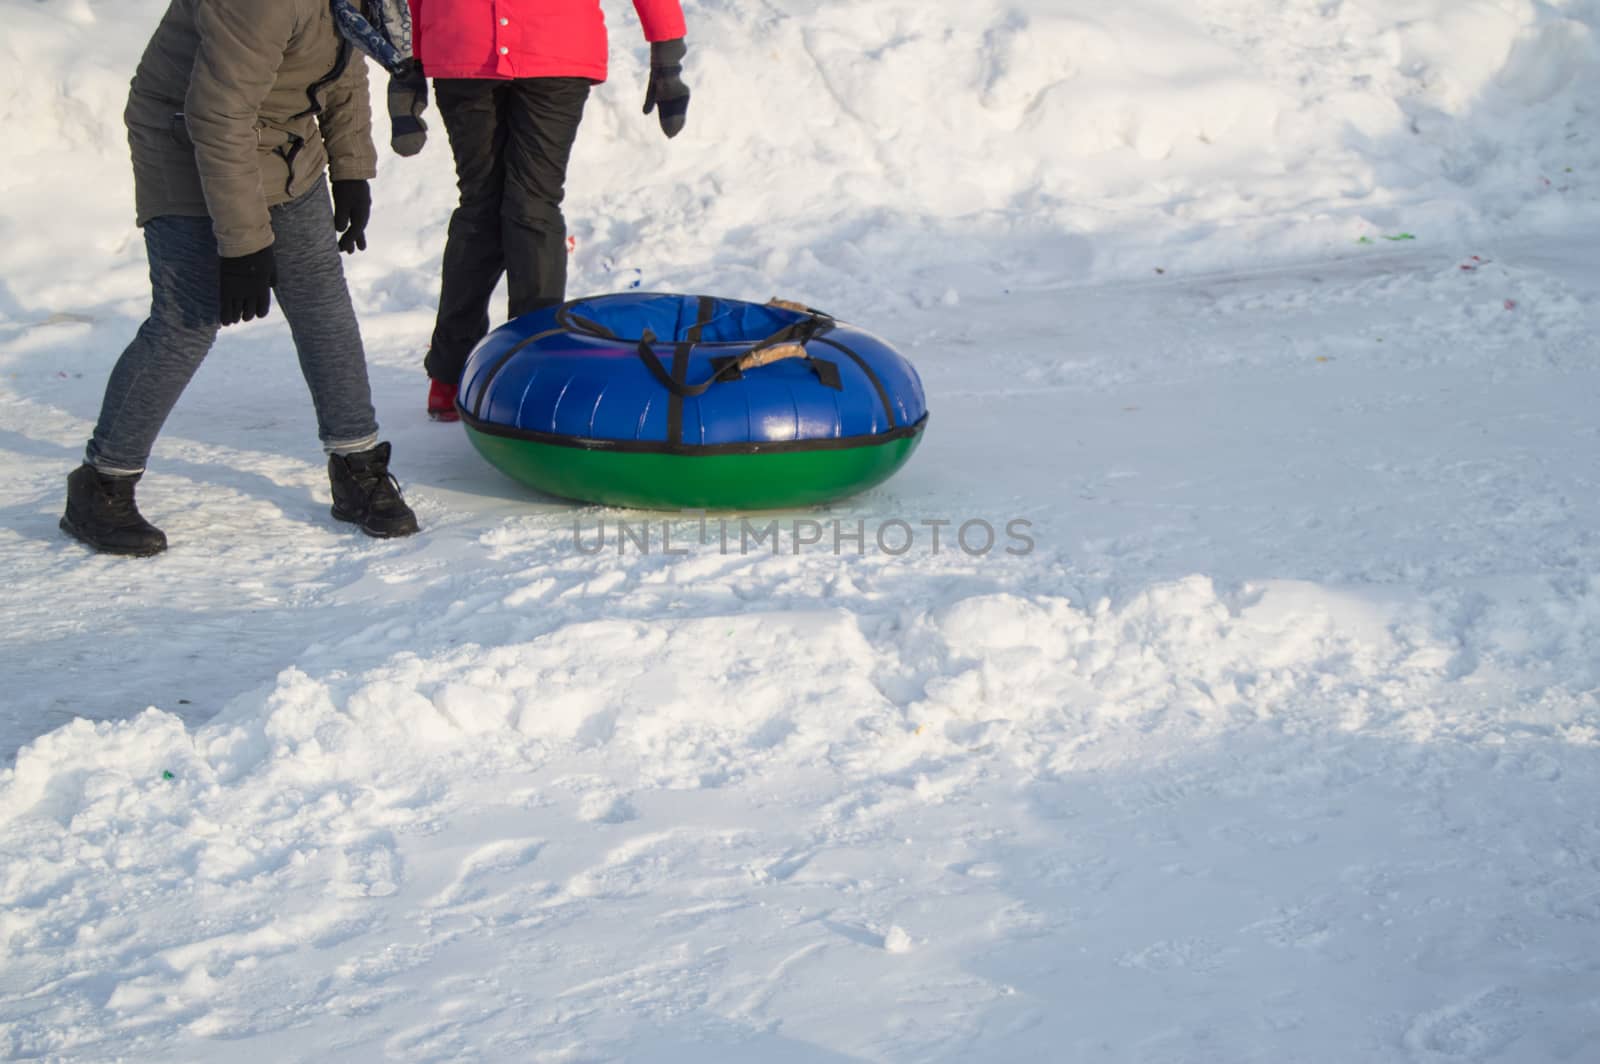 Two teenage girls rolled down the mountain on a tubing, winter fun in the Park.